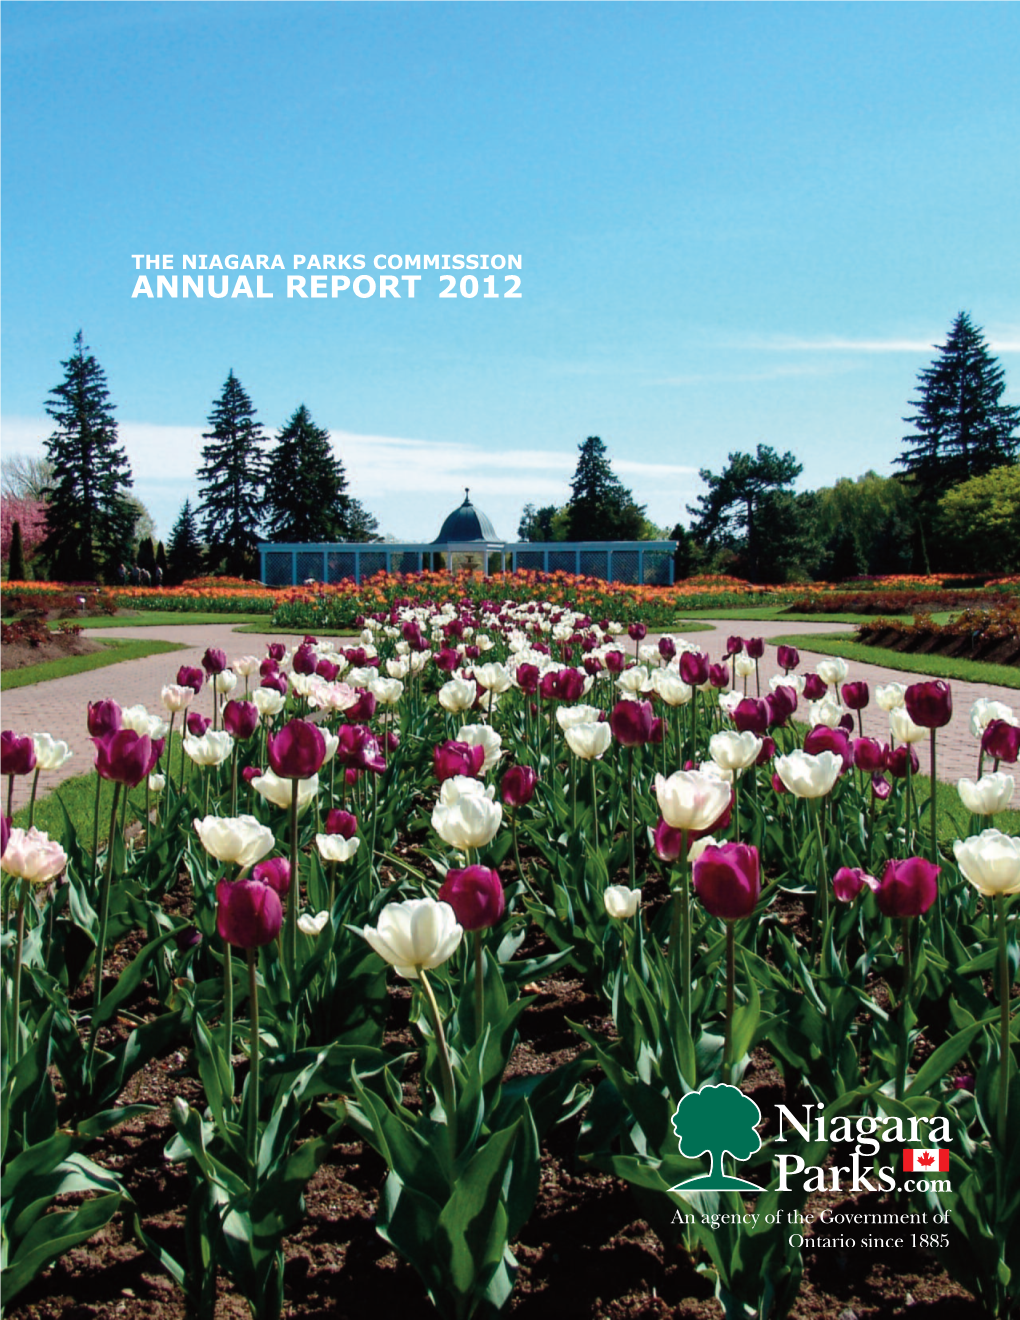 THE NIAGARA PARKS COMMISSION ANNUAL REPORT 2012 the Niagara Parks Commission Our Role & Mission